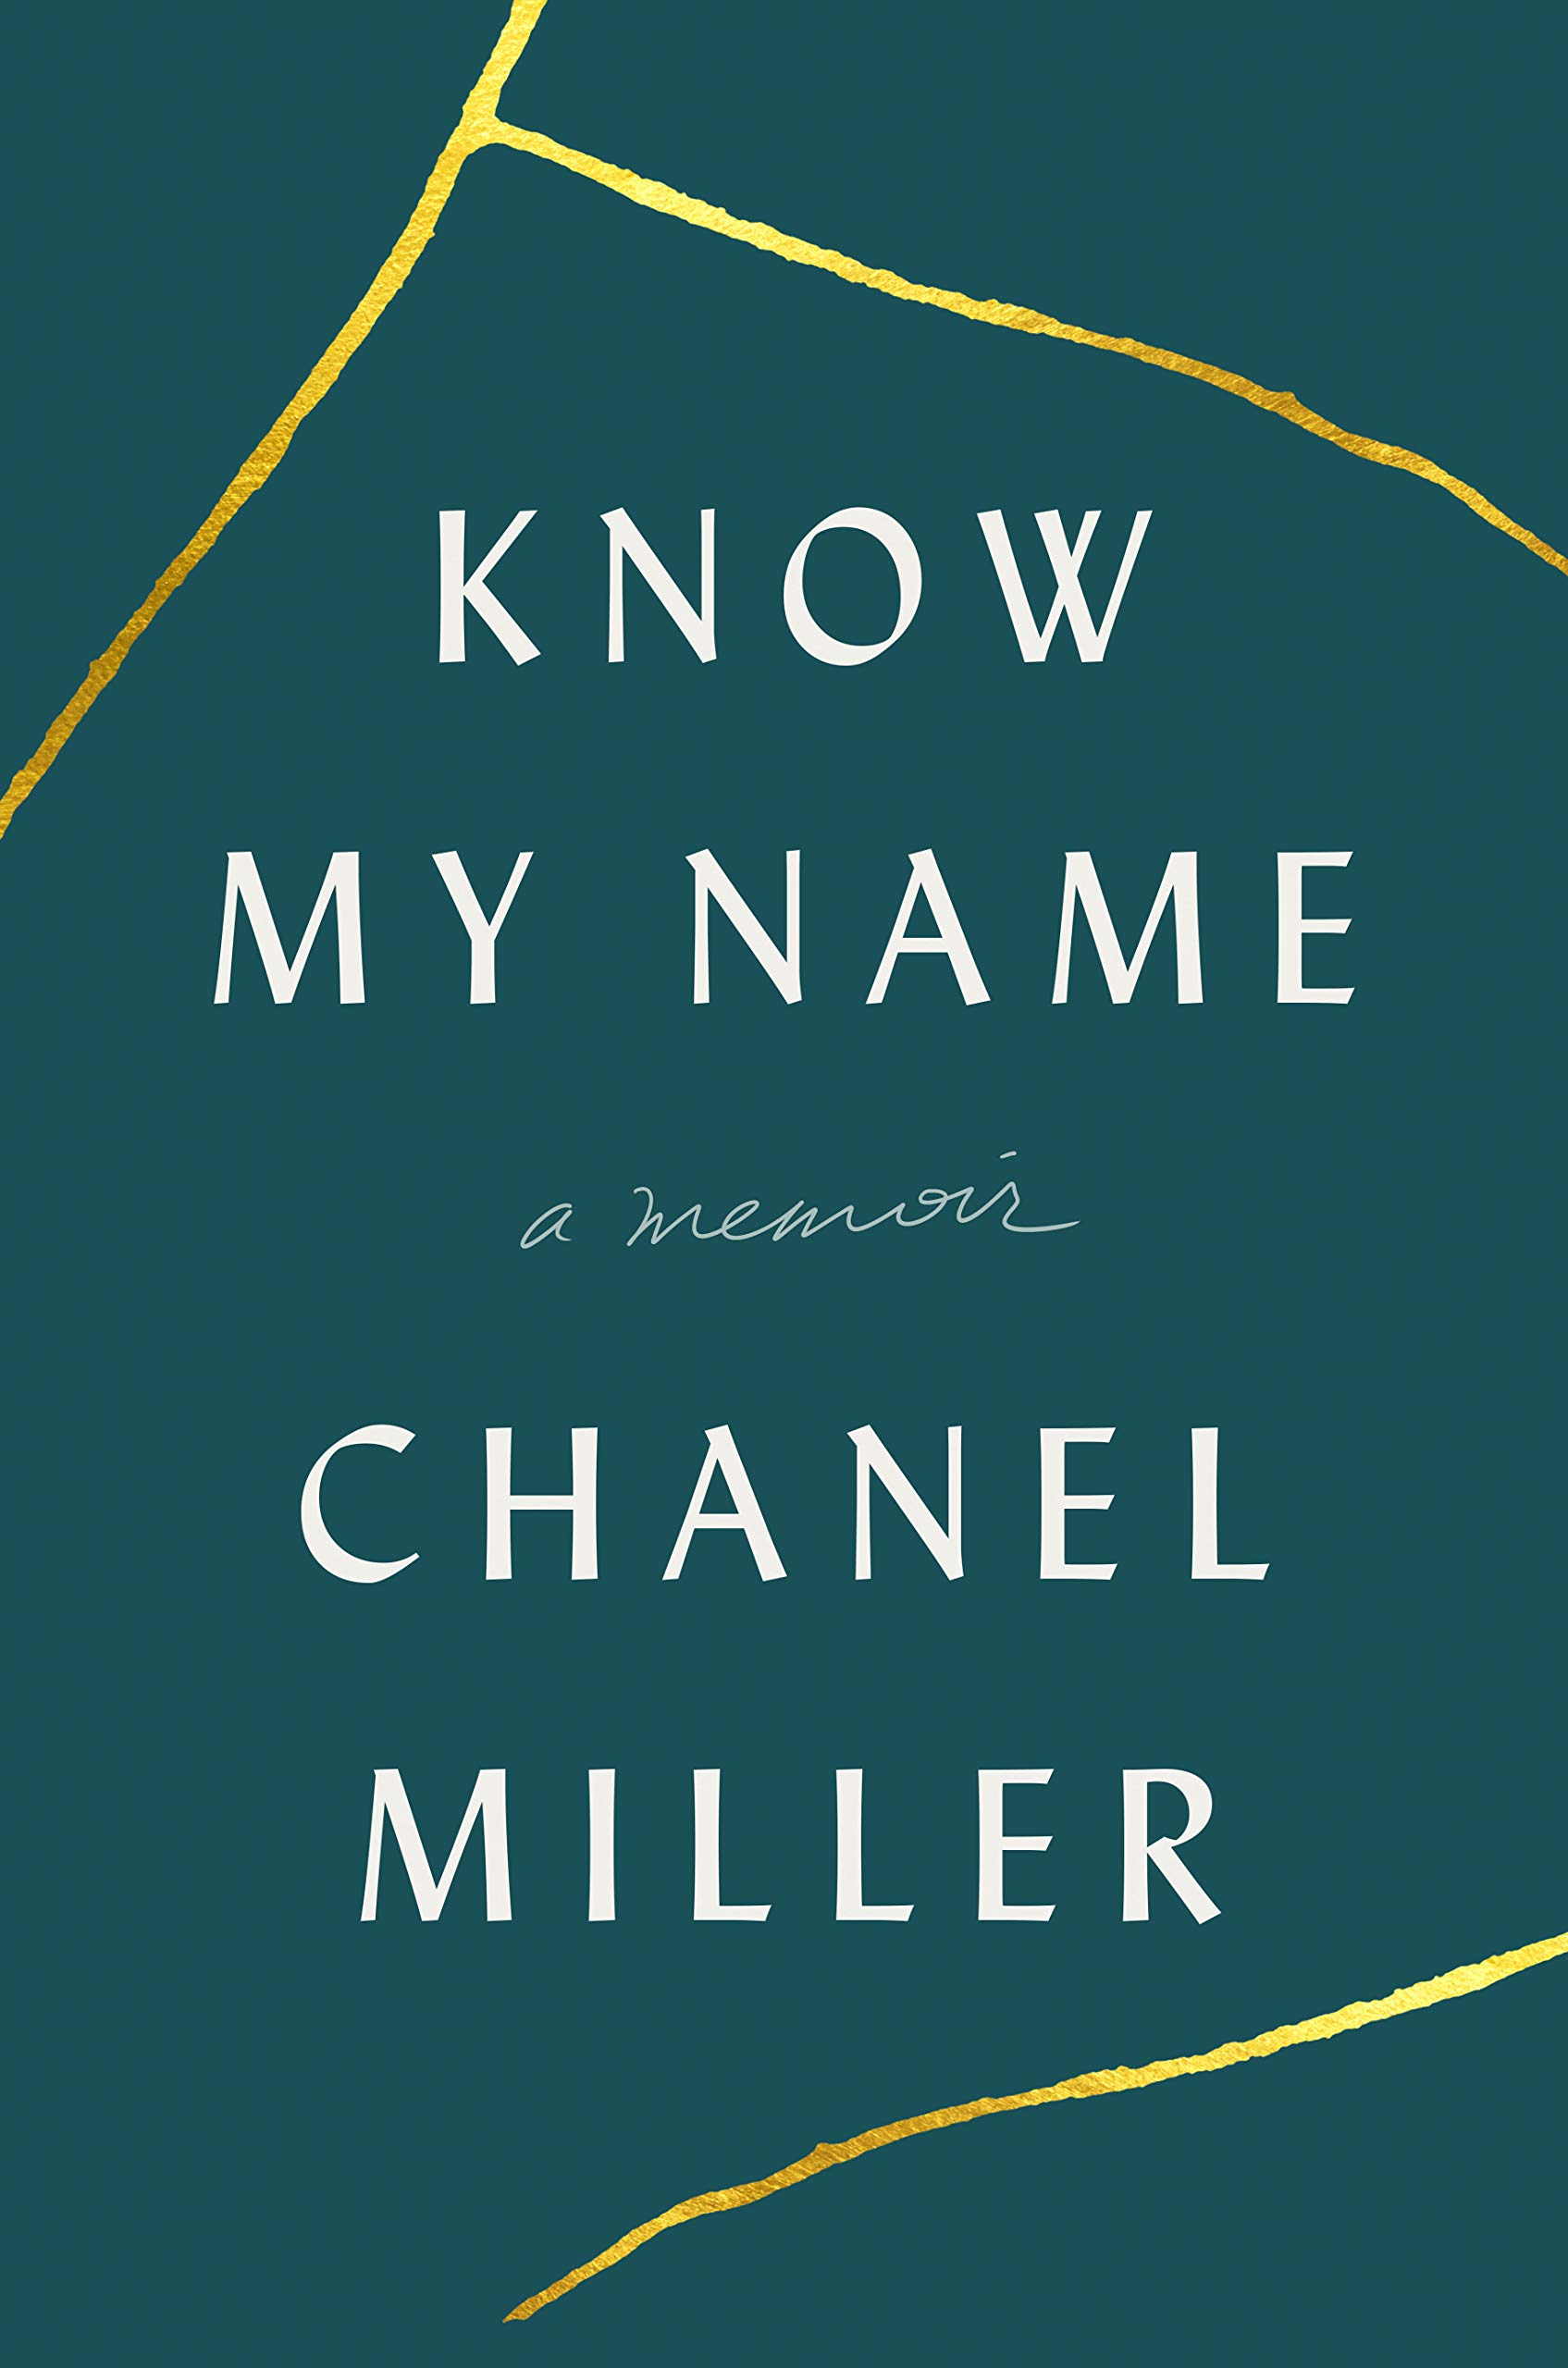 Know My Name by Chanel Miller book review